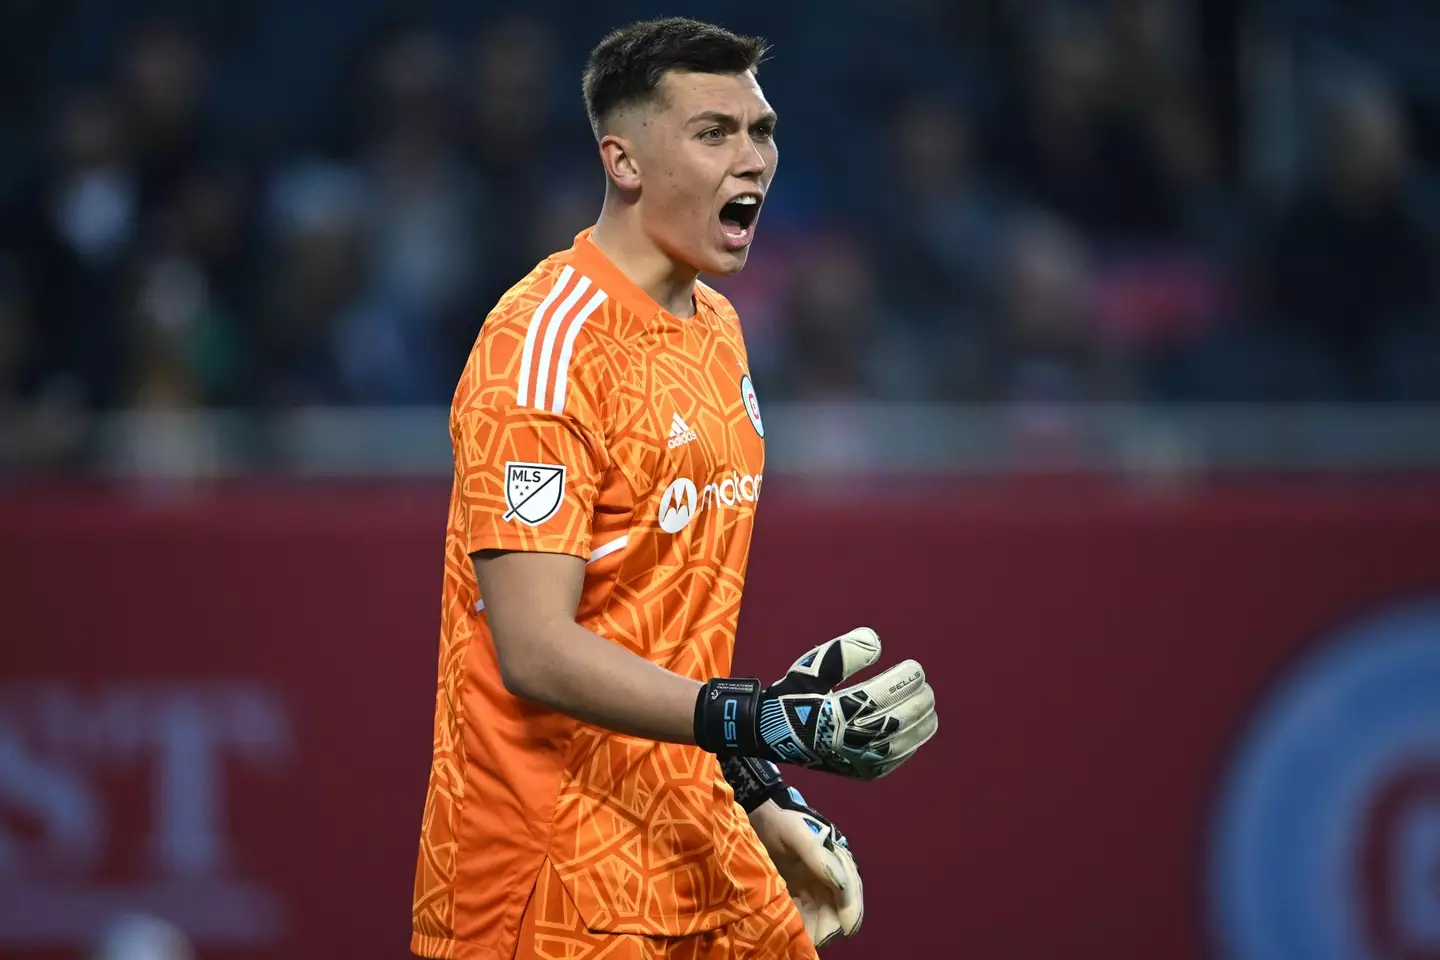 Chicago Fire goalkeeper Gabriel Slonina (1) reacts to a play in action during a game between the Chicago Fire and the New York Red Bulls. (Alamy)